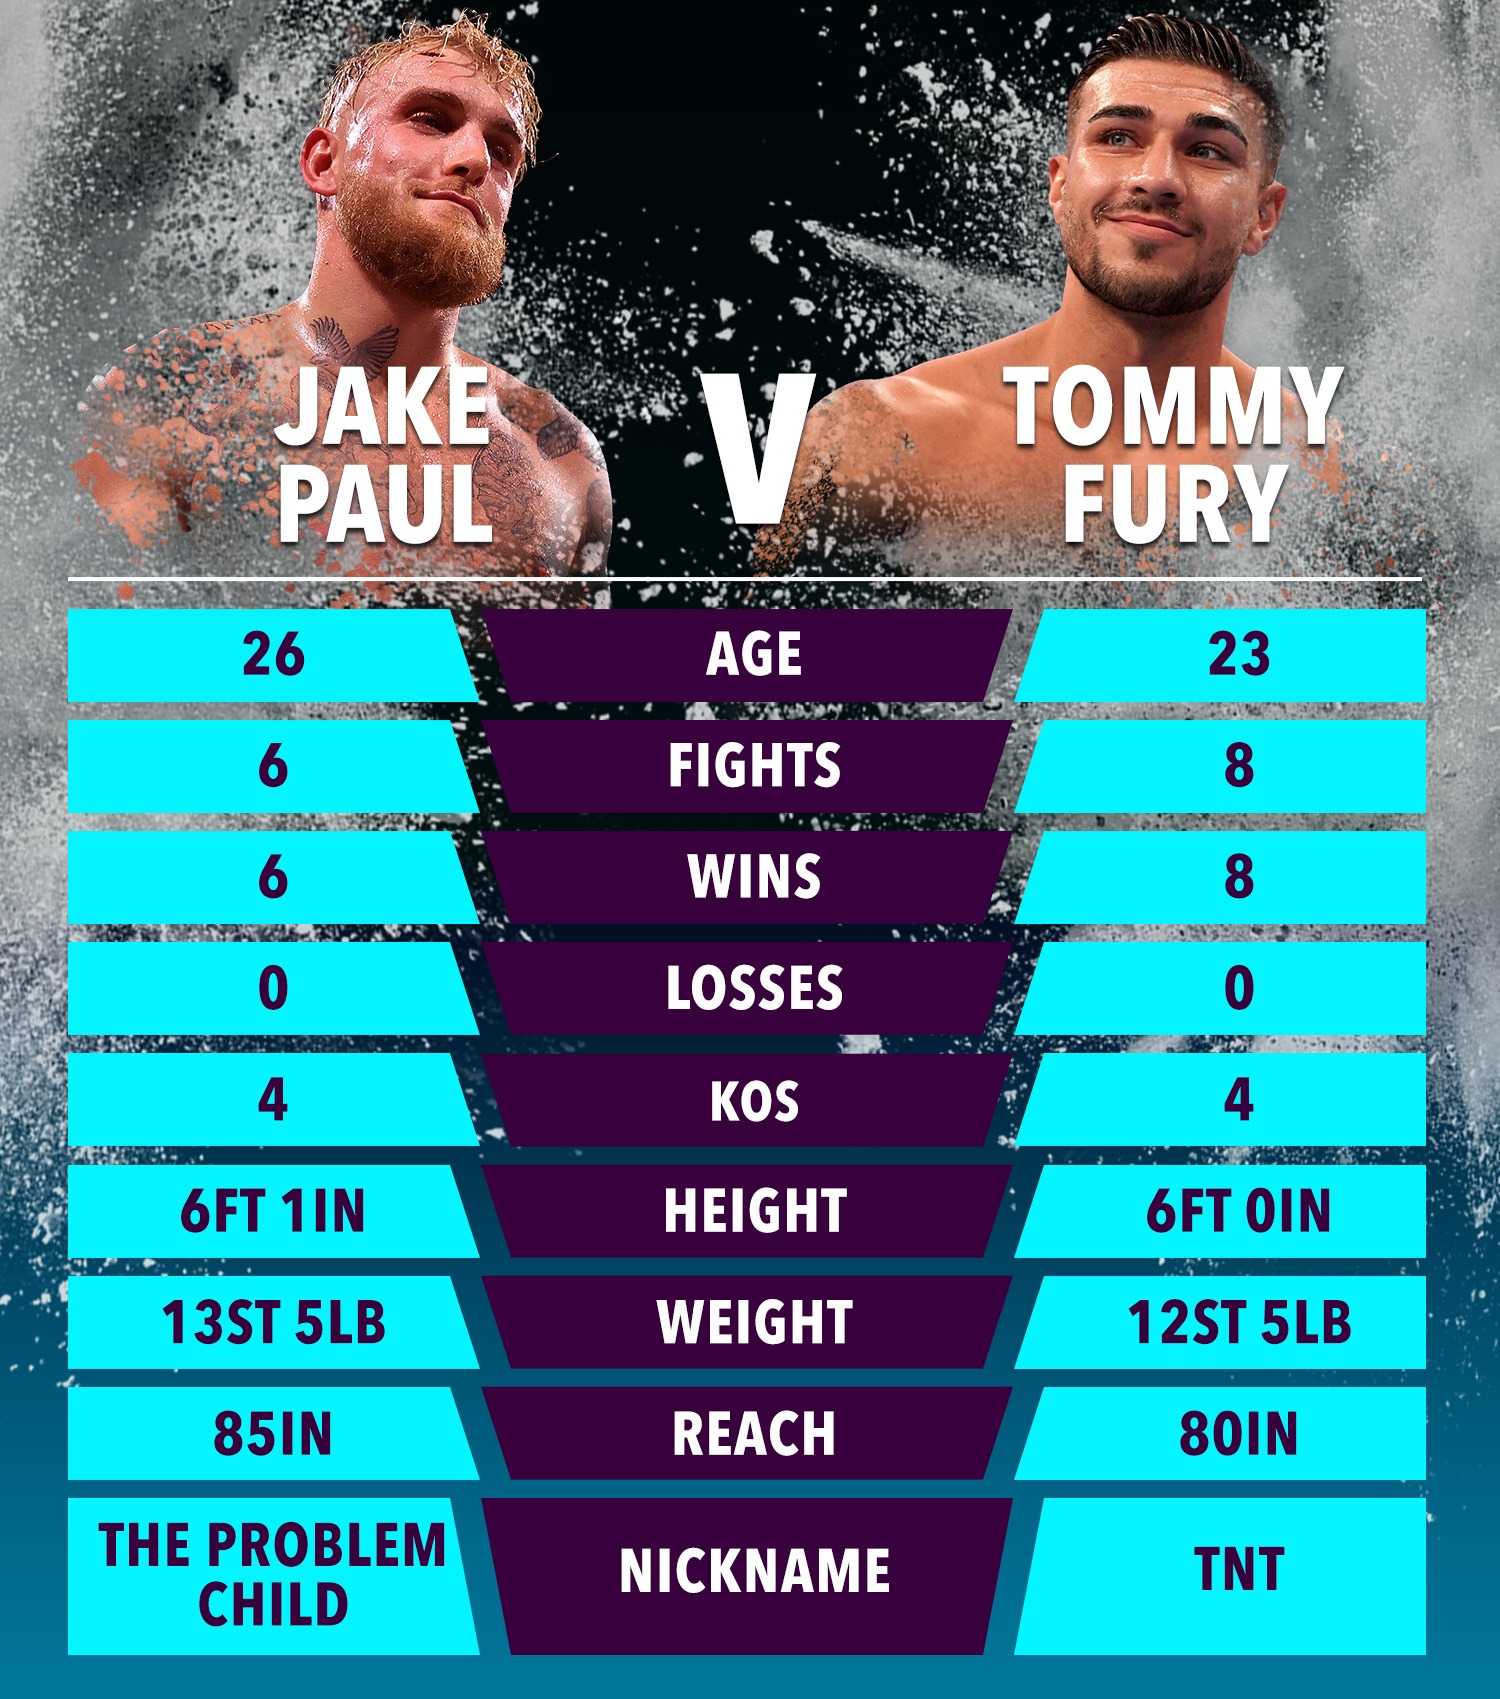 , ‘Arrogant, egotistical, greedy p***k’ – Jake Paul rips into Tommy Fury for ‘wasting boxing community’s time’